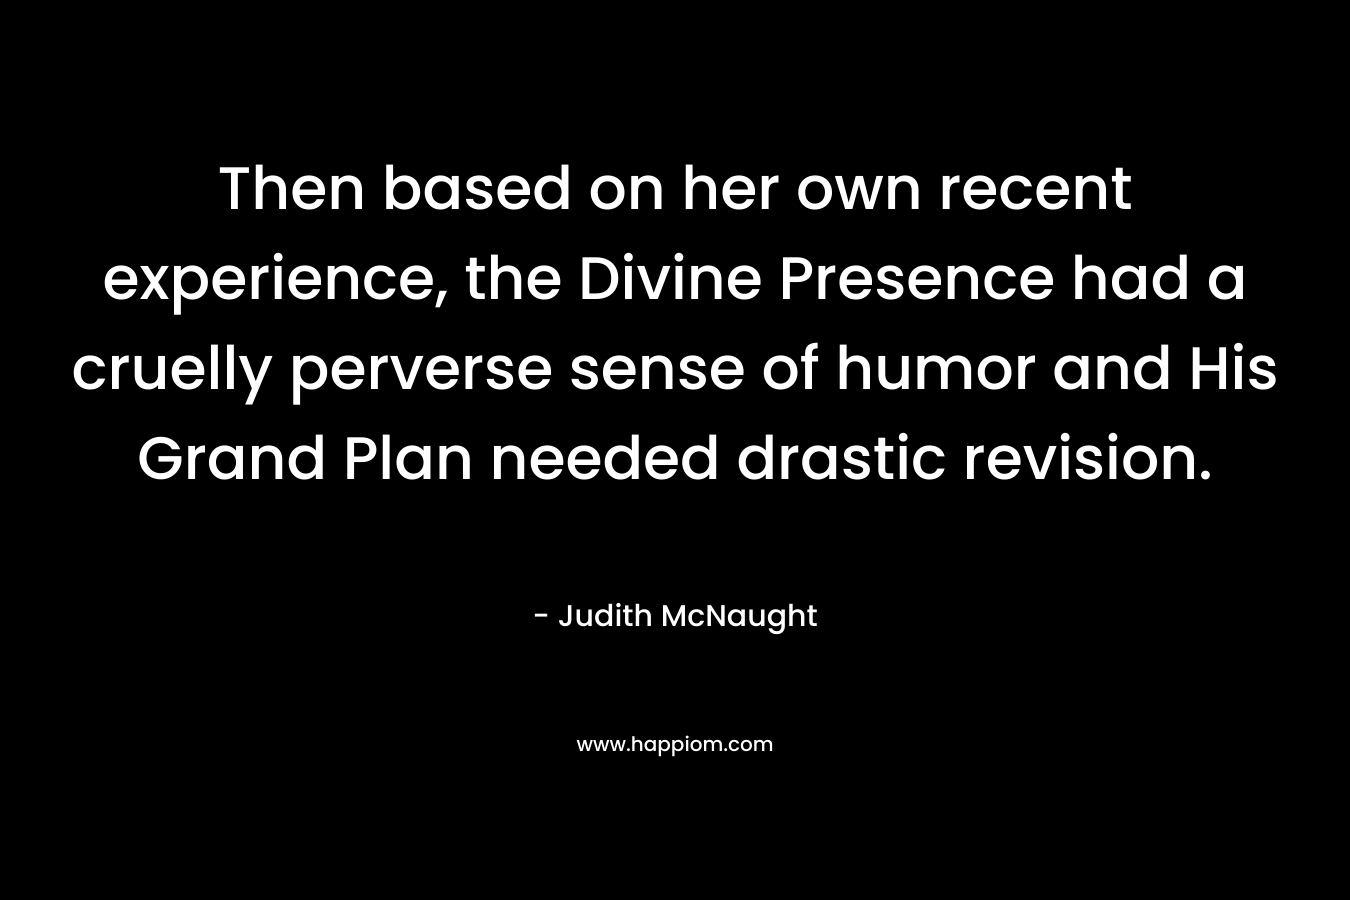 Then based on her own recent experience, the Divine Presence had a cruelly perverse sense of humor and His Grand Plan needed drastic revision. – Judith McNaught